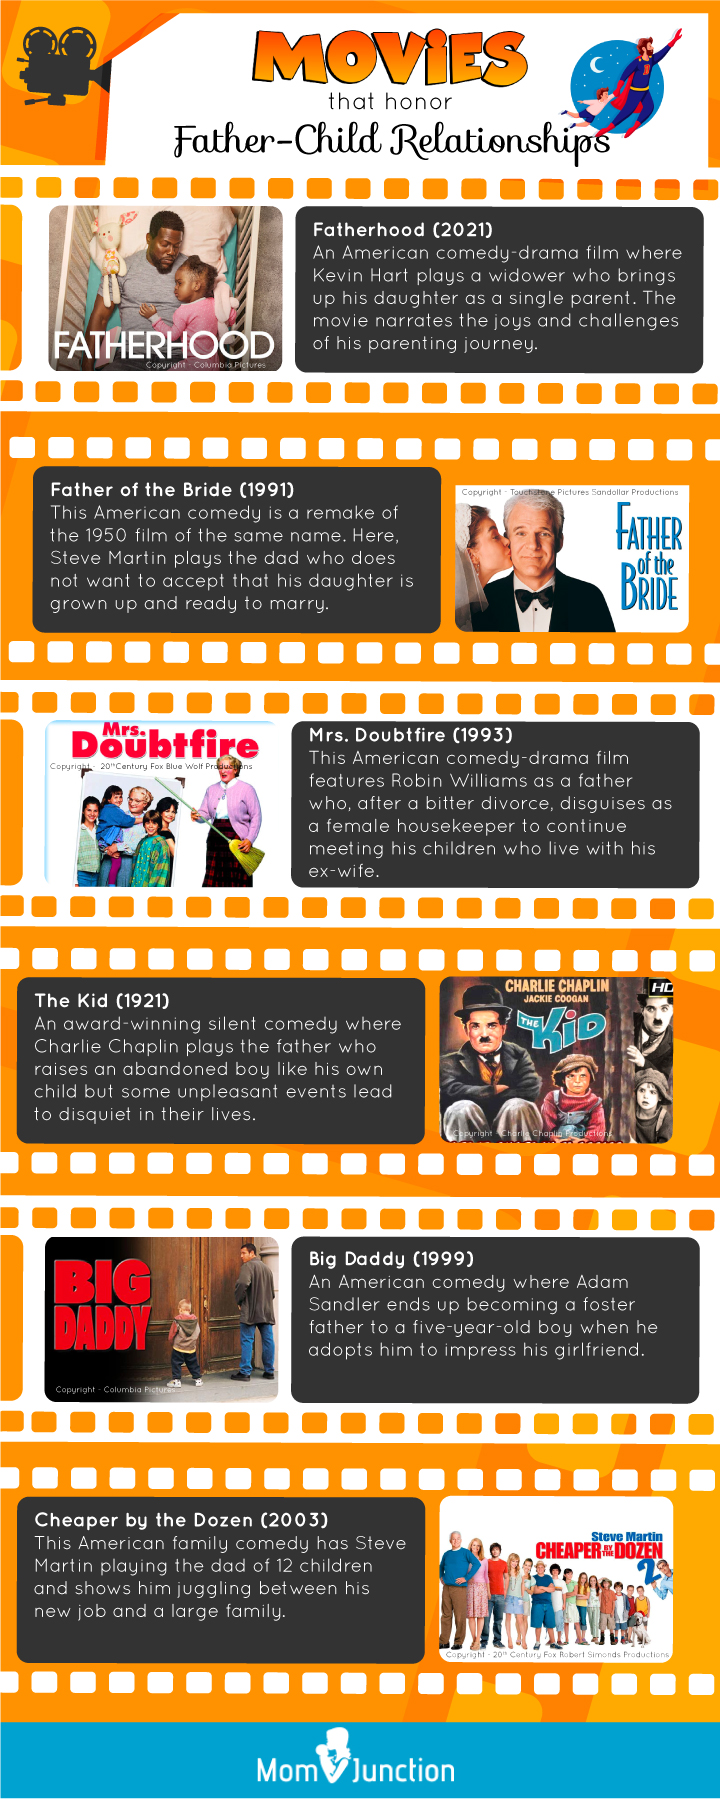 popular movies that honor father-child relationships (infographic)